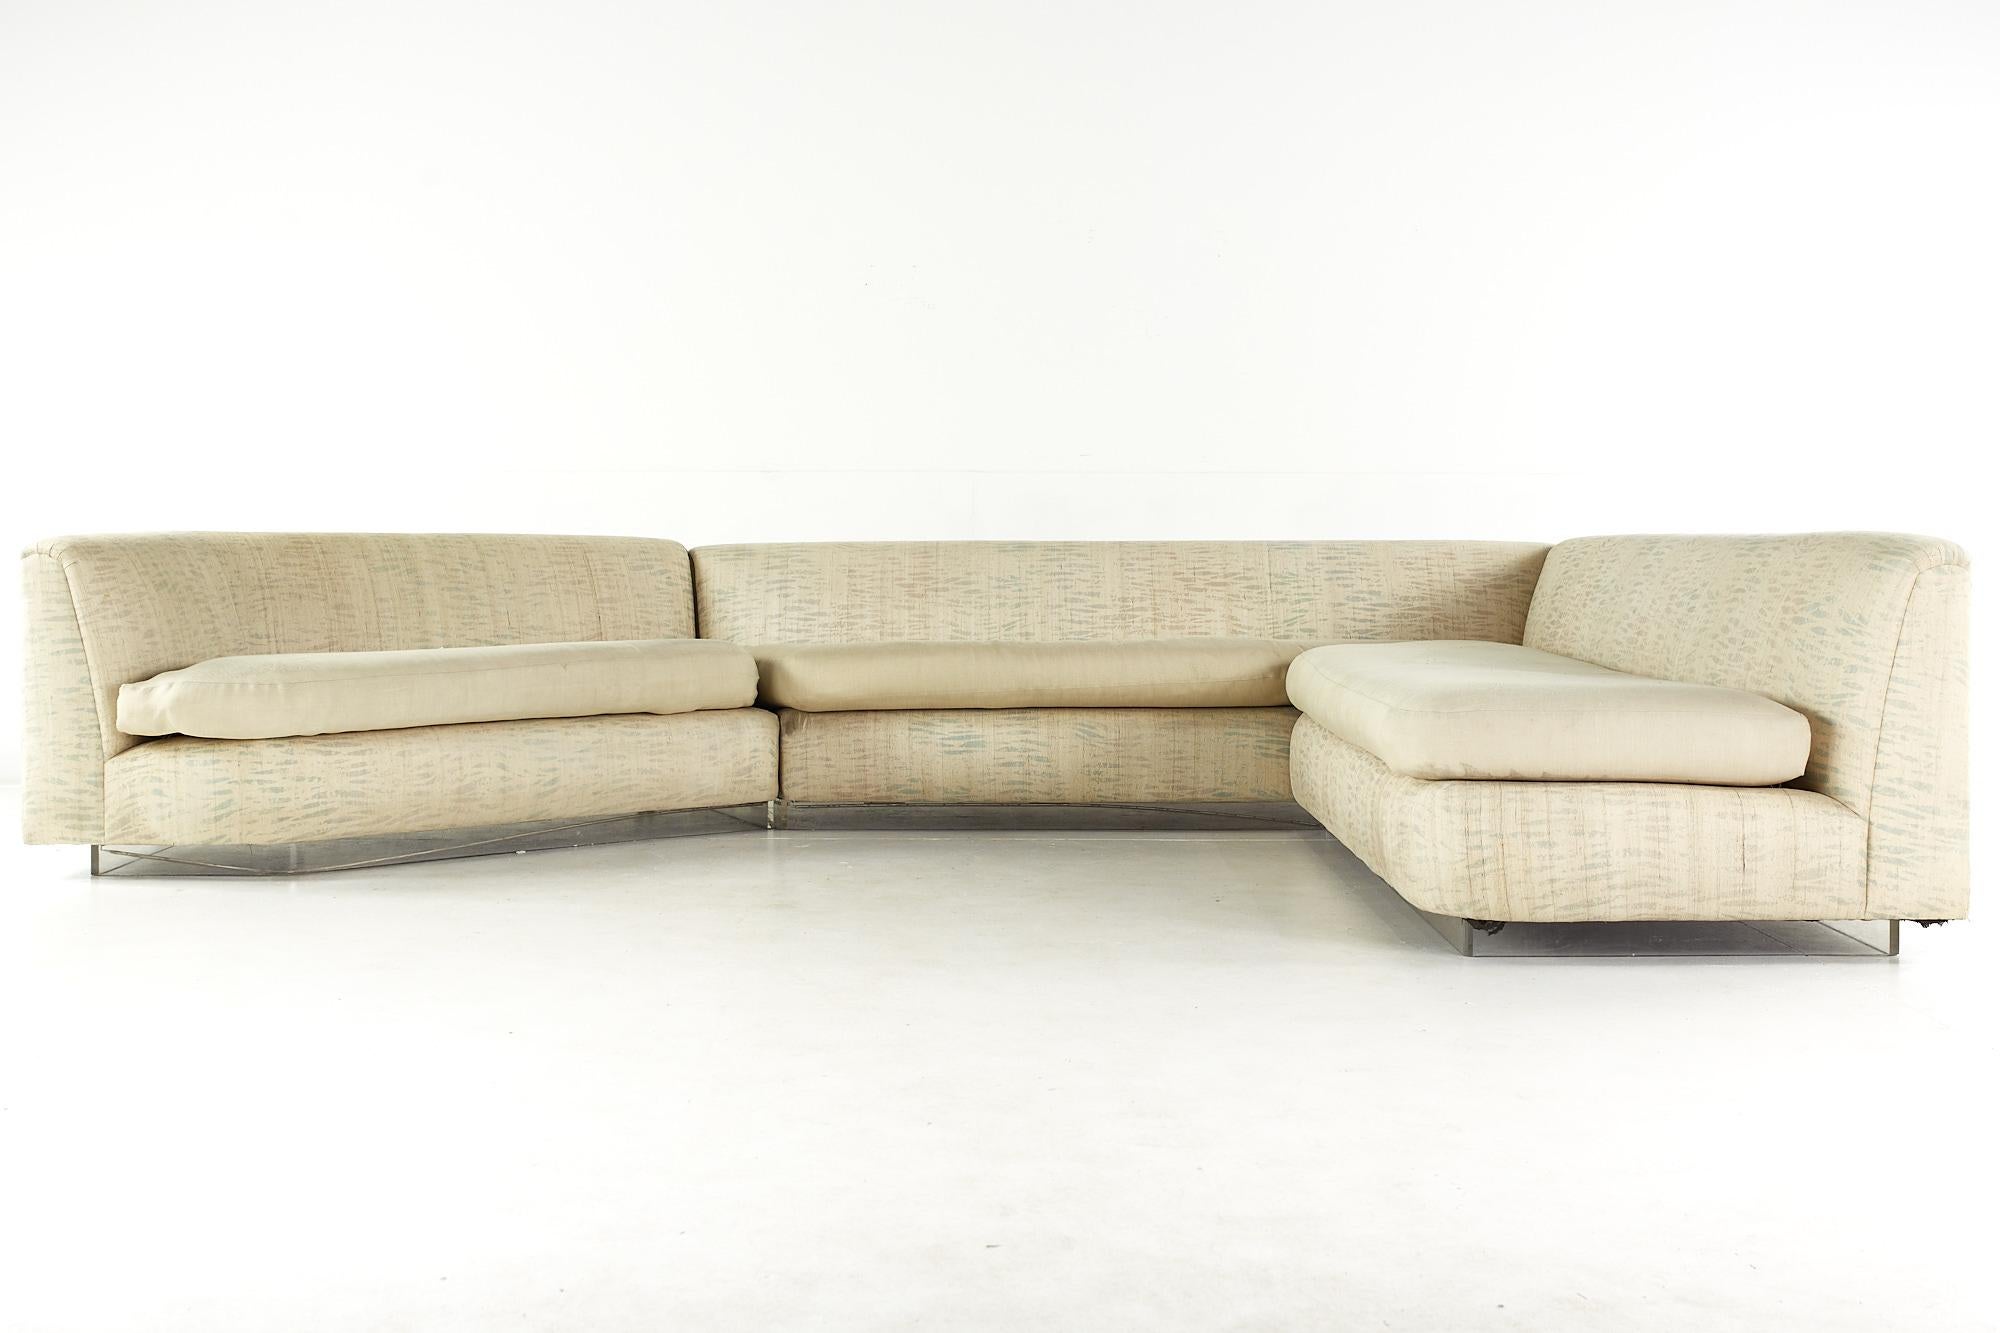 Phyllis Morris mid-century illuminated lucite base sectional sofa.

This sectional sofa measures: 147 wide x 111 deep x 28.5 inches high, with a seat height of 18 inches high.

All pieces of furniture can be had in what we call restored vintage